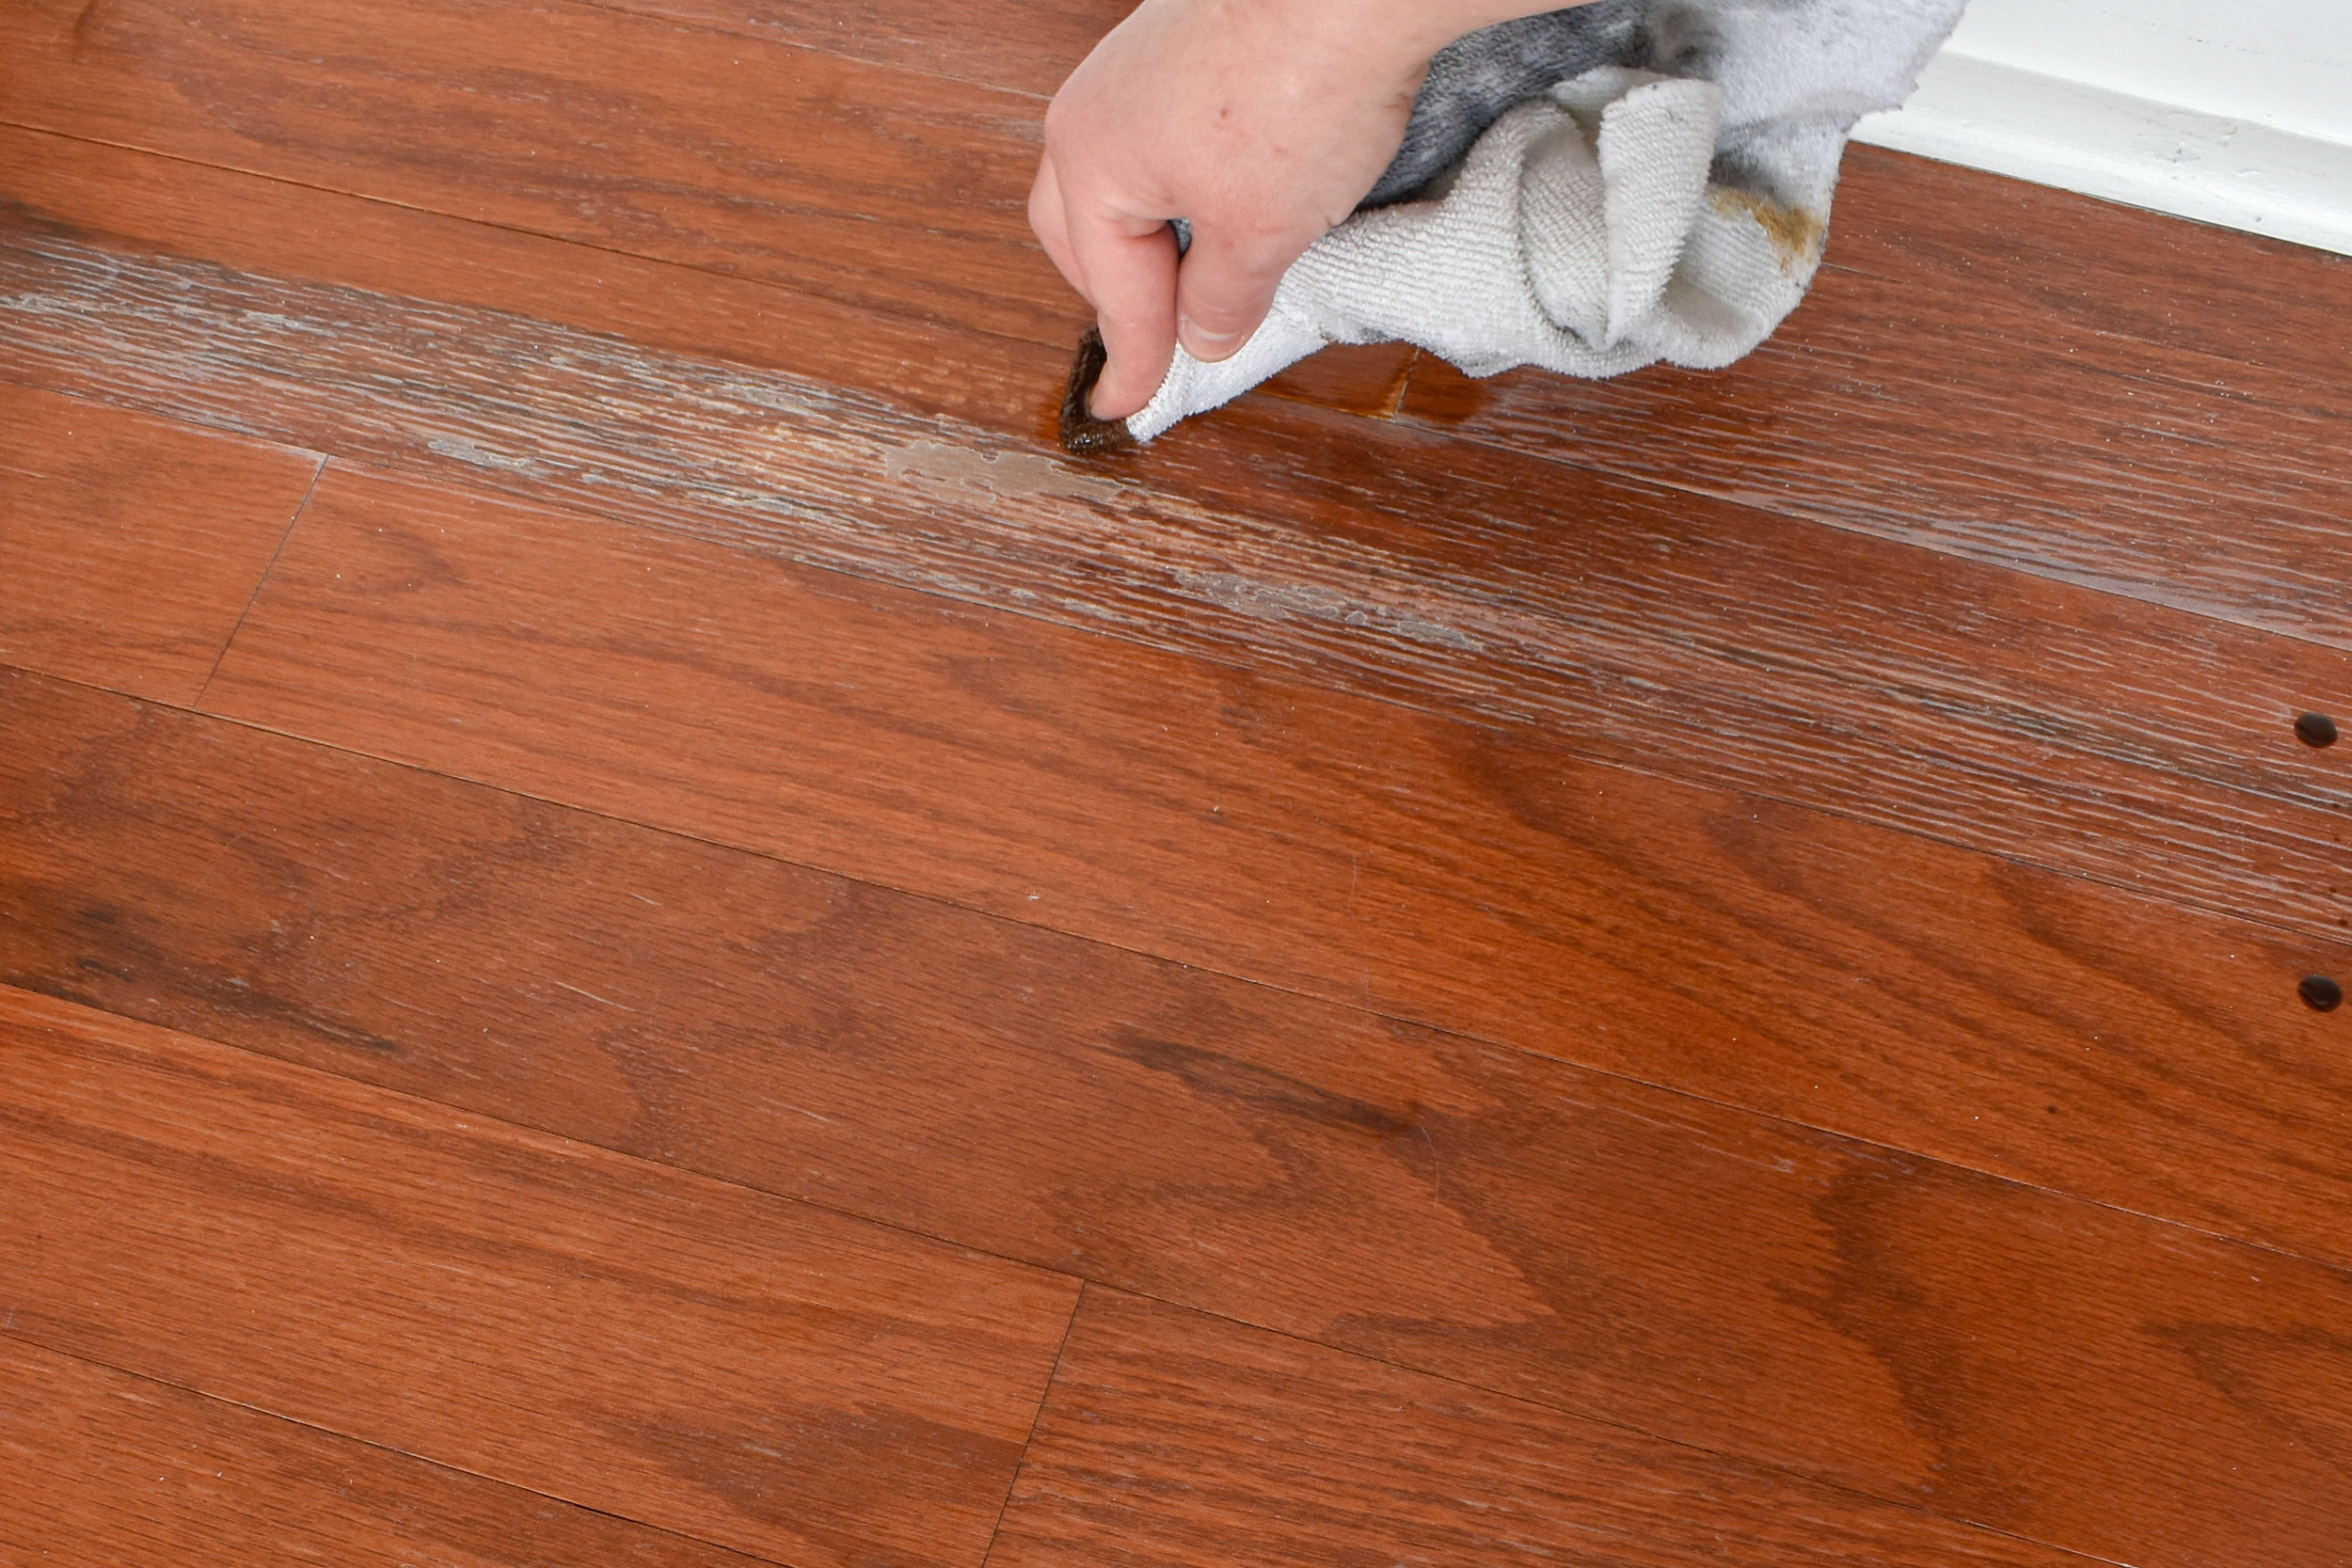 How To Make Old Hardwood Floors Shine, How To Clean Old Very Dirty Hardwood Floors